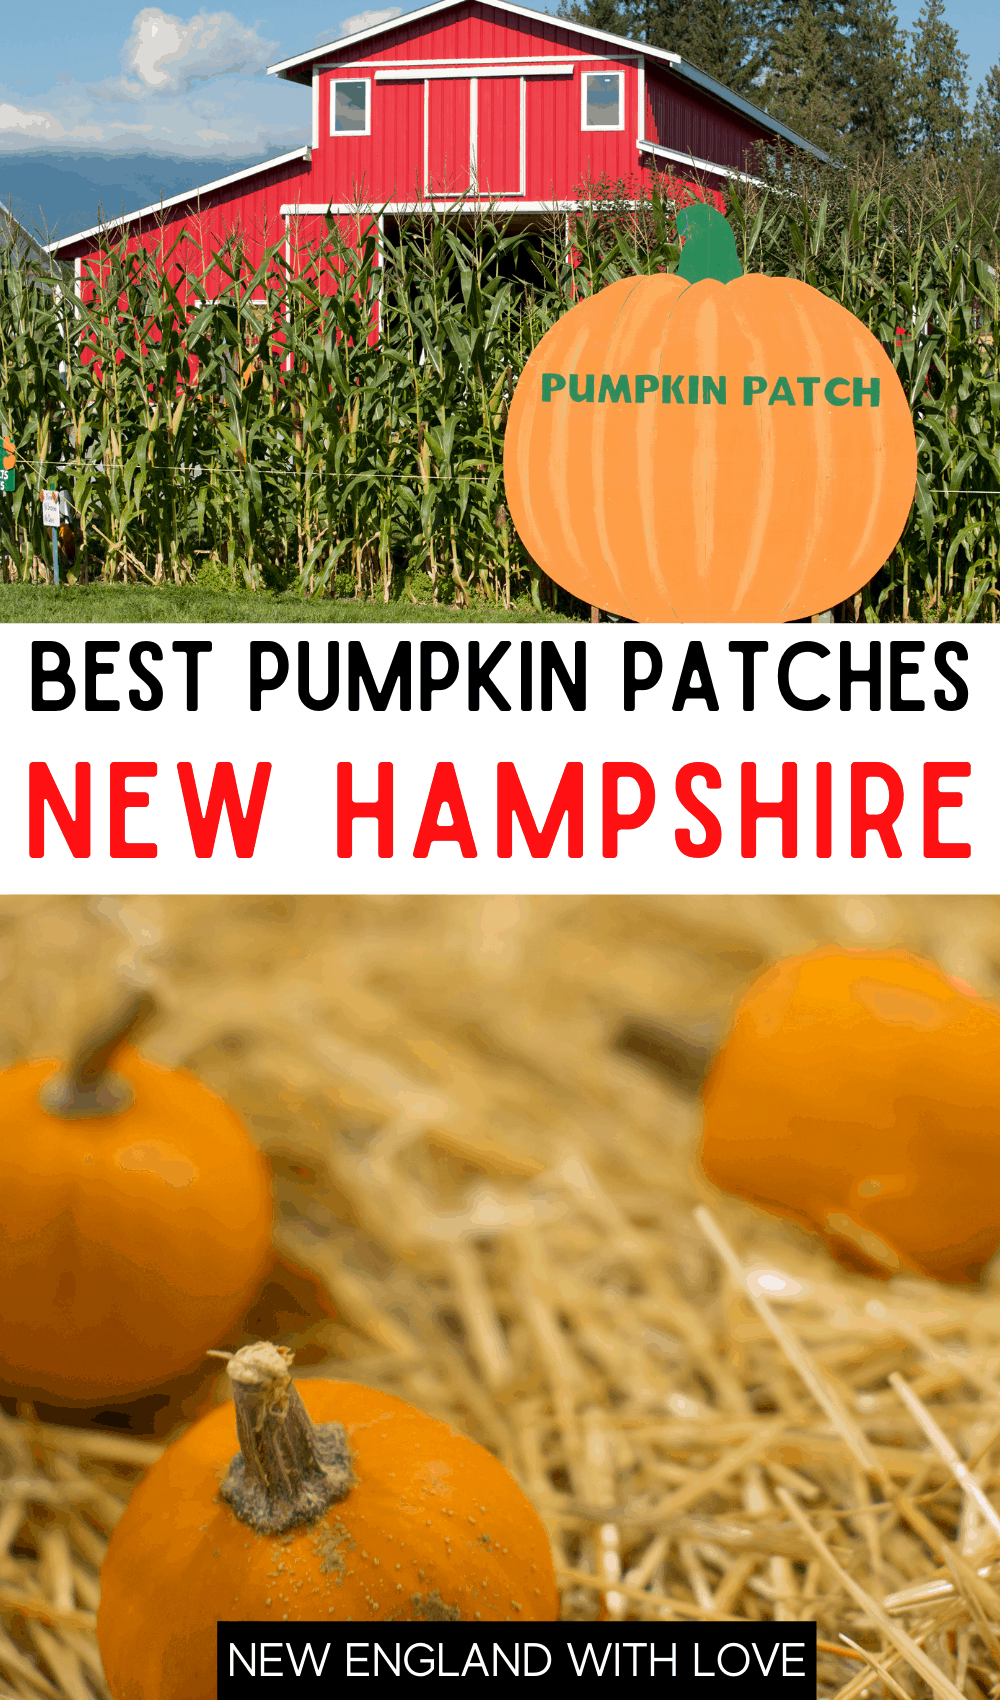 Pinterest graphic reading "BEST PUMPKIN PATCHES NEW HAMPSHIRE"